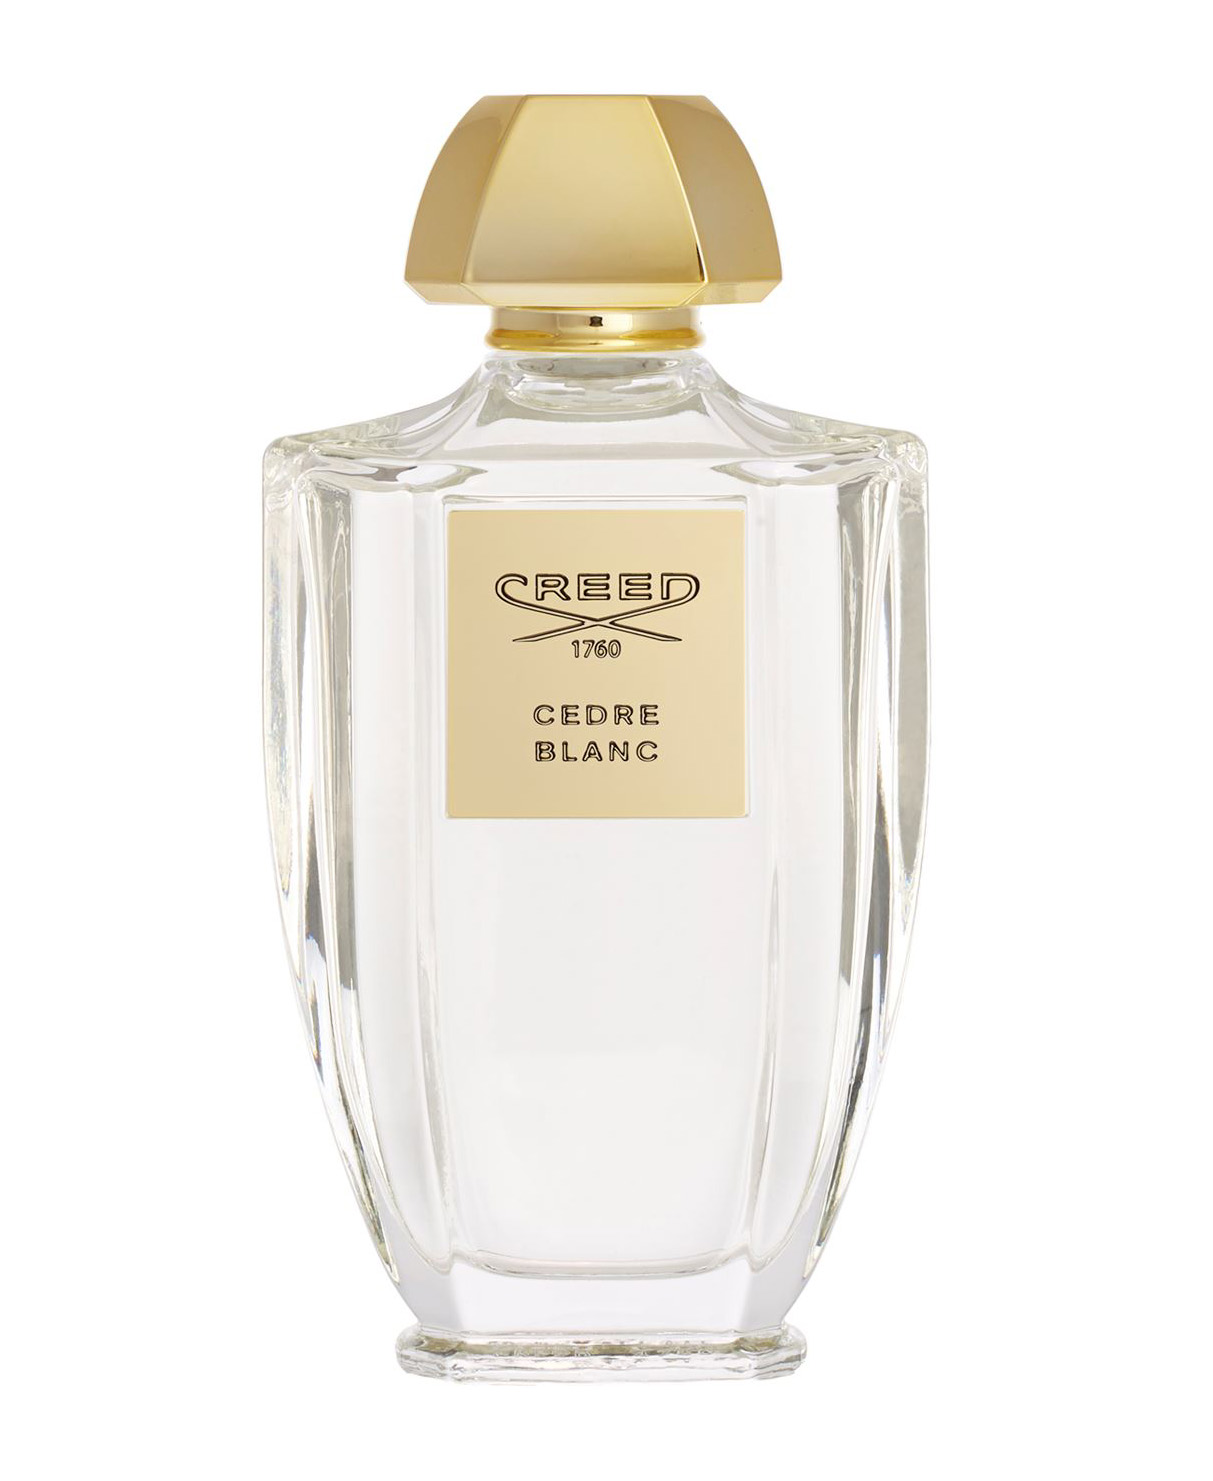 Creed's Cedre Blanc